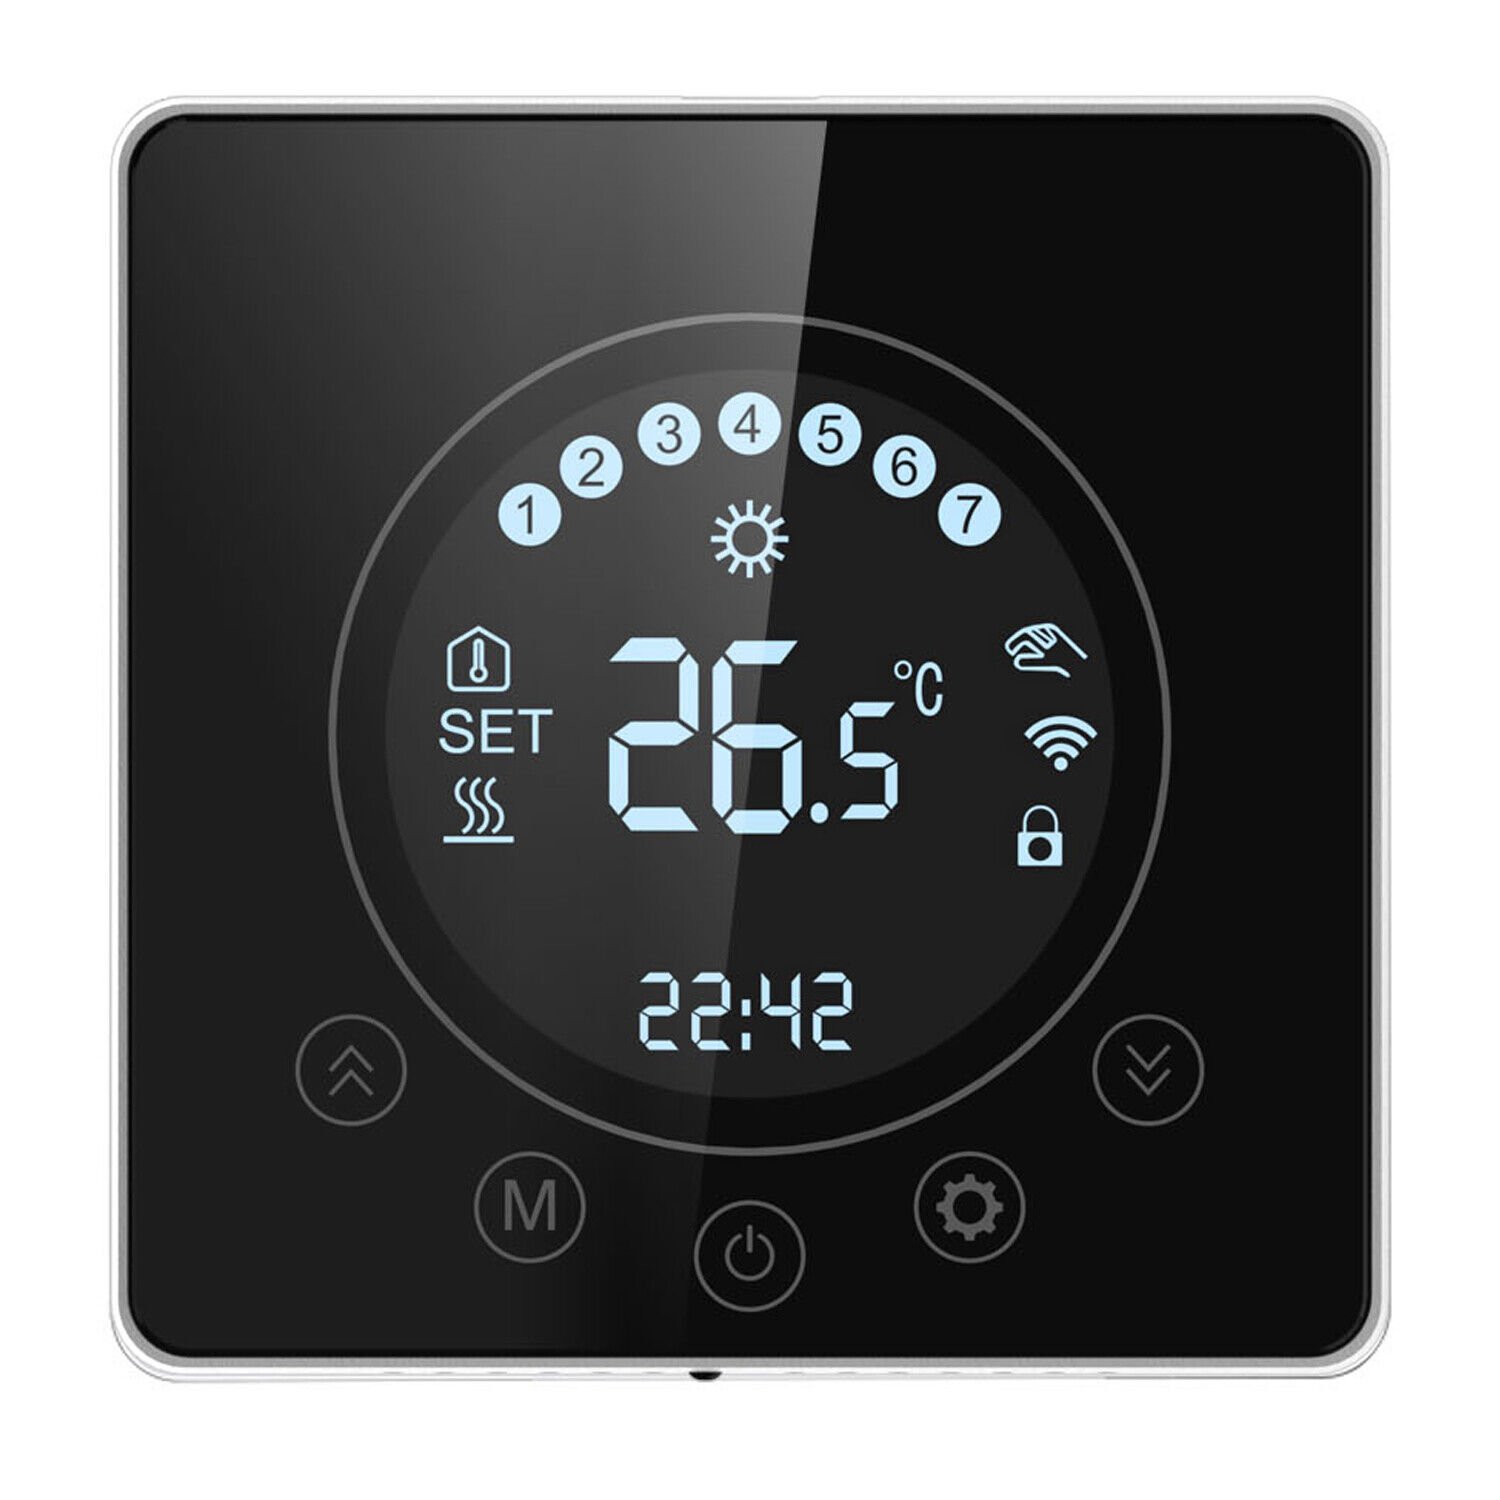 Bosch CR100 thermostat alternative to connect to home assistant :  r/homeautomation